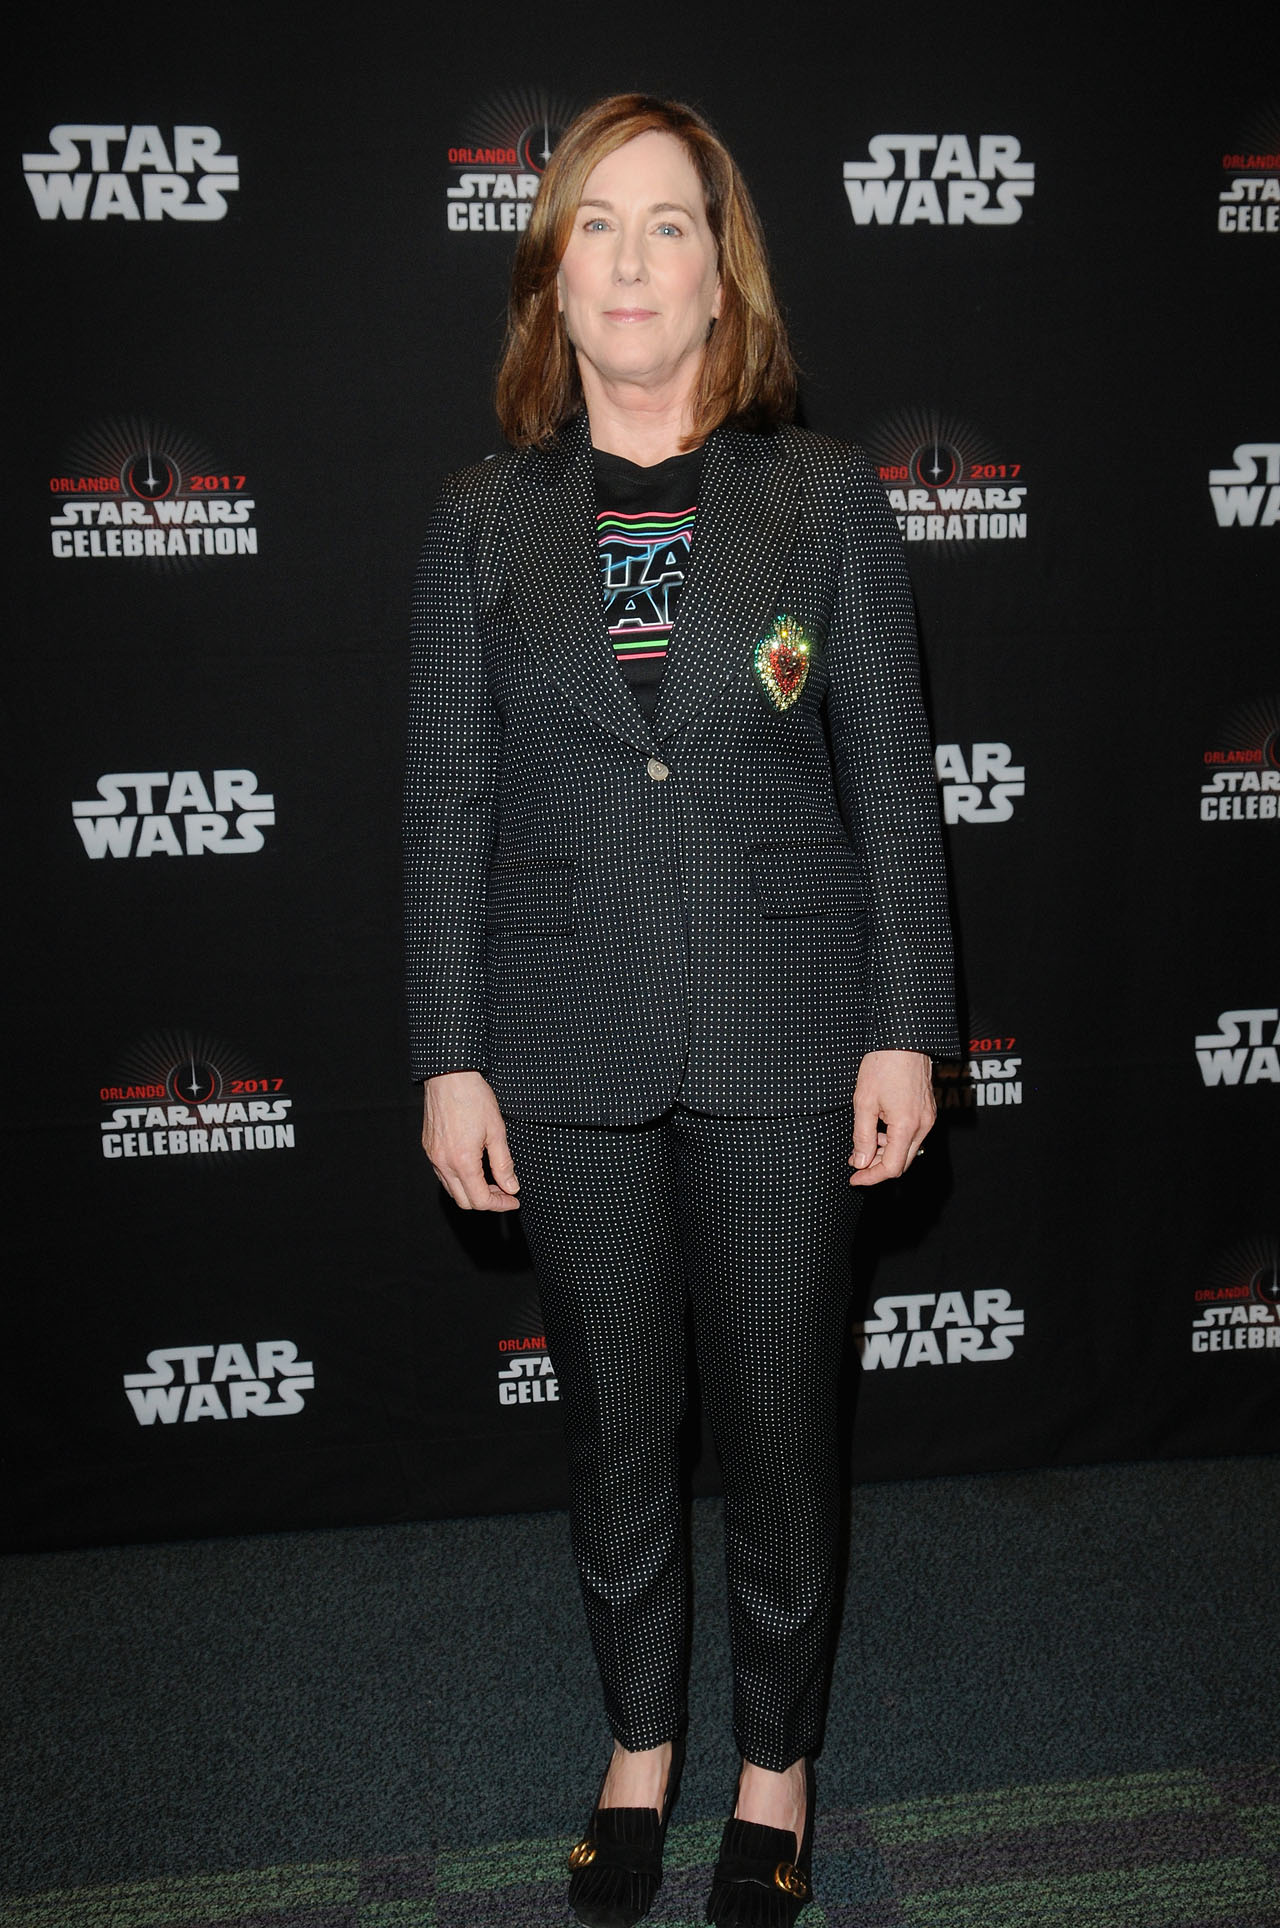 ORLANDO, FL - APRIL 14:  Kathleen Kennedy attends the STAR WARS: THE LAST JEDI PANEL during the 2017 STAR WARS CELEBRATION at Orange County Convention Center on April 14, 2017 in Orlando, Florida.  (Photo by Gerardo Mora/Getty Images for Disney) *** Local Caption *** Kathleen Kennedy